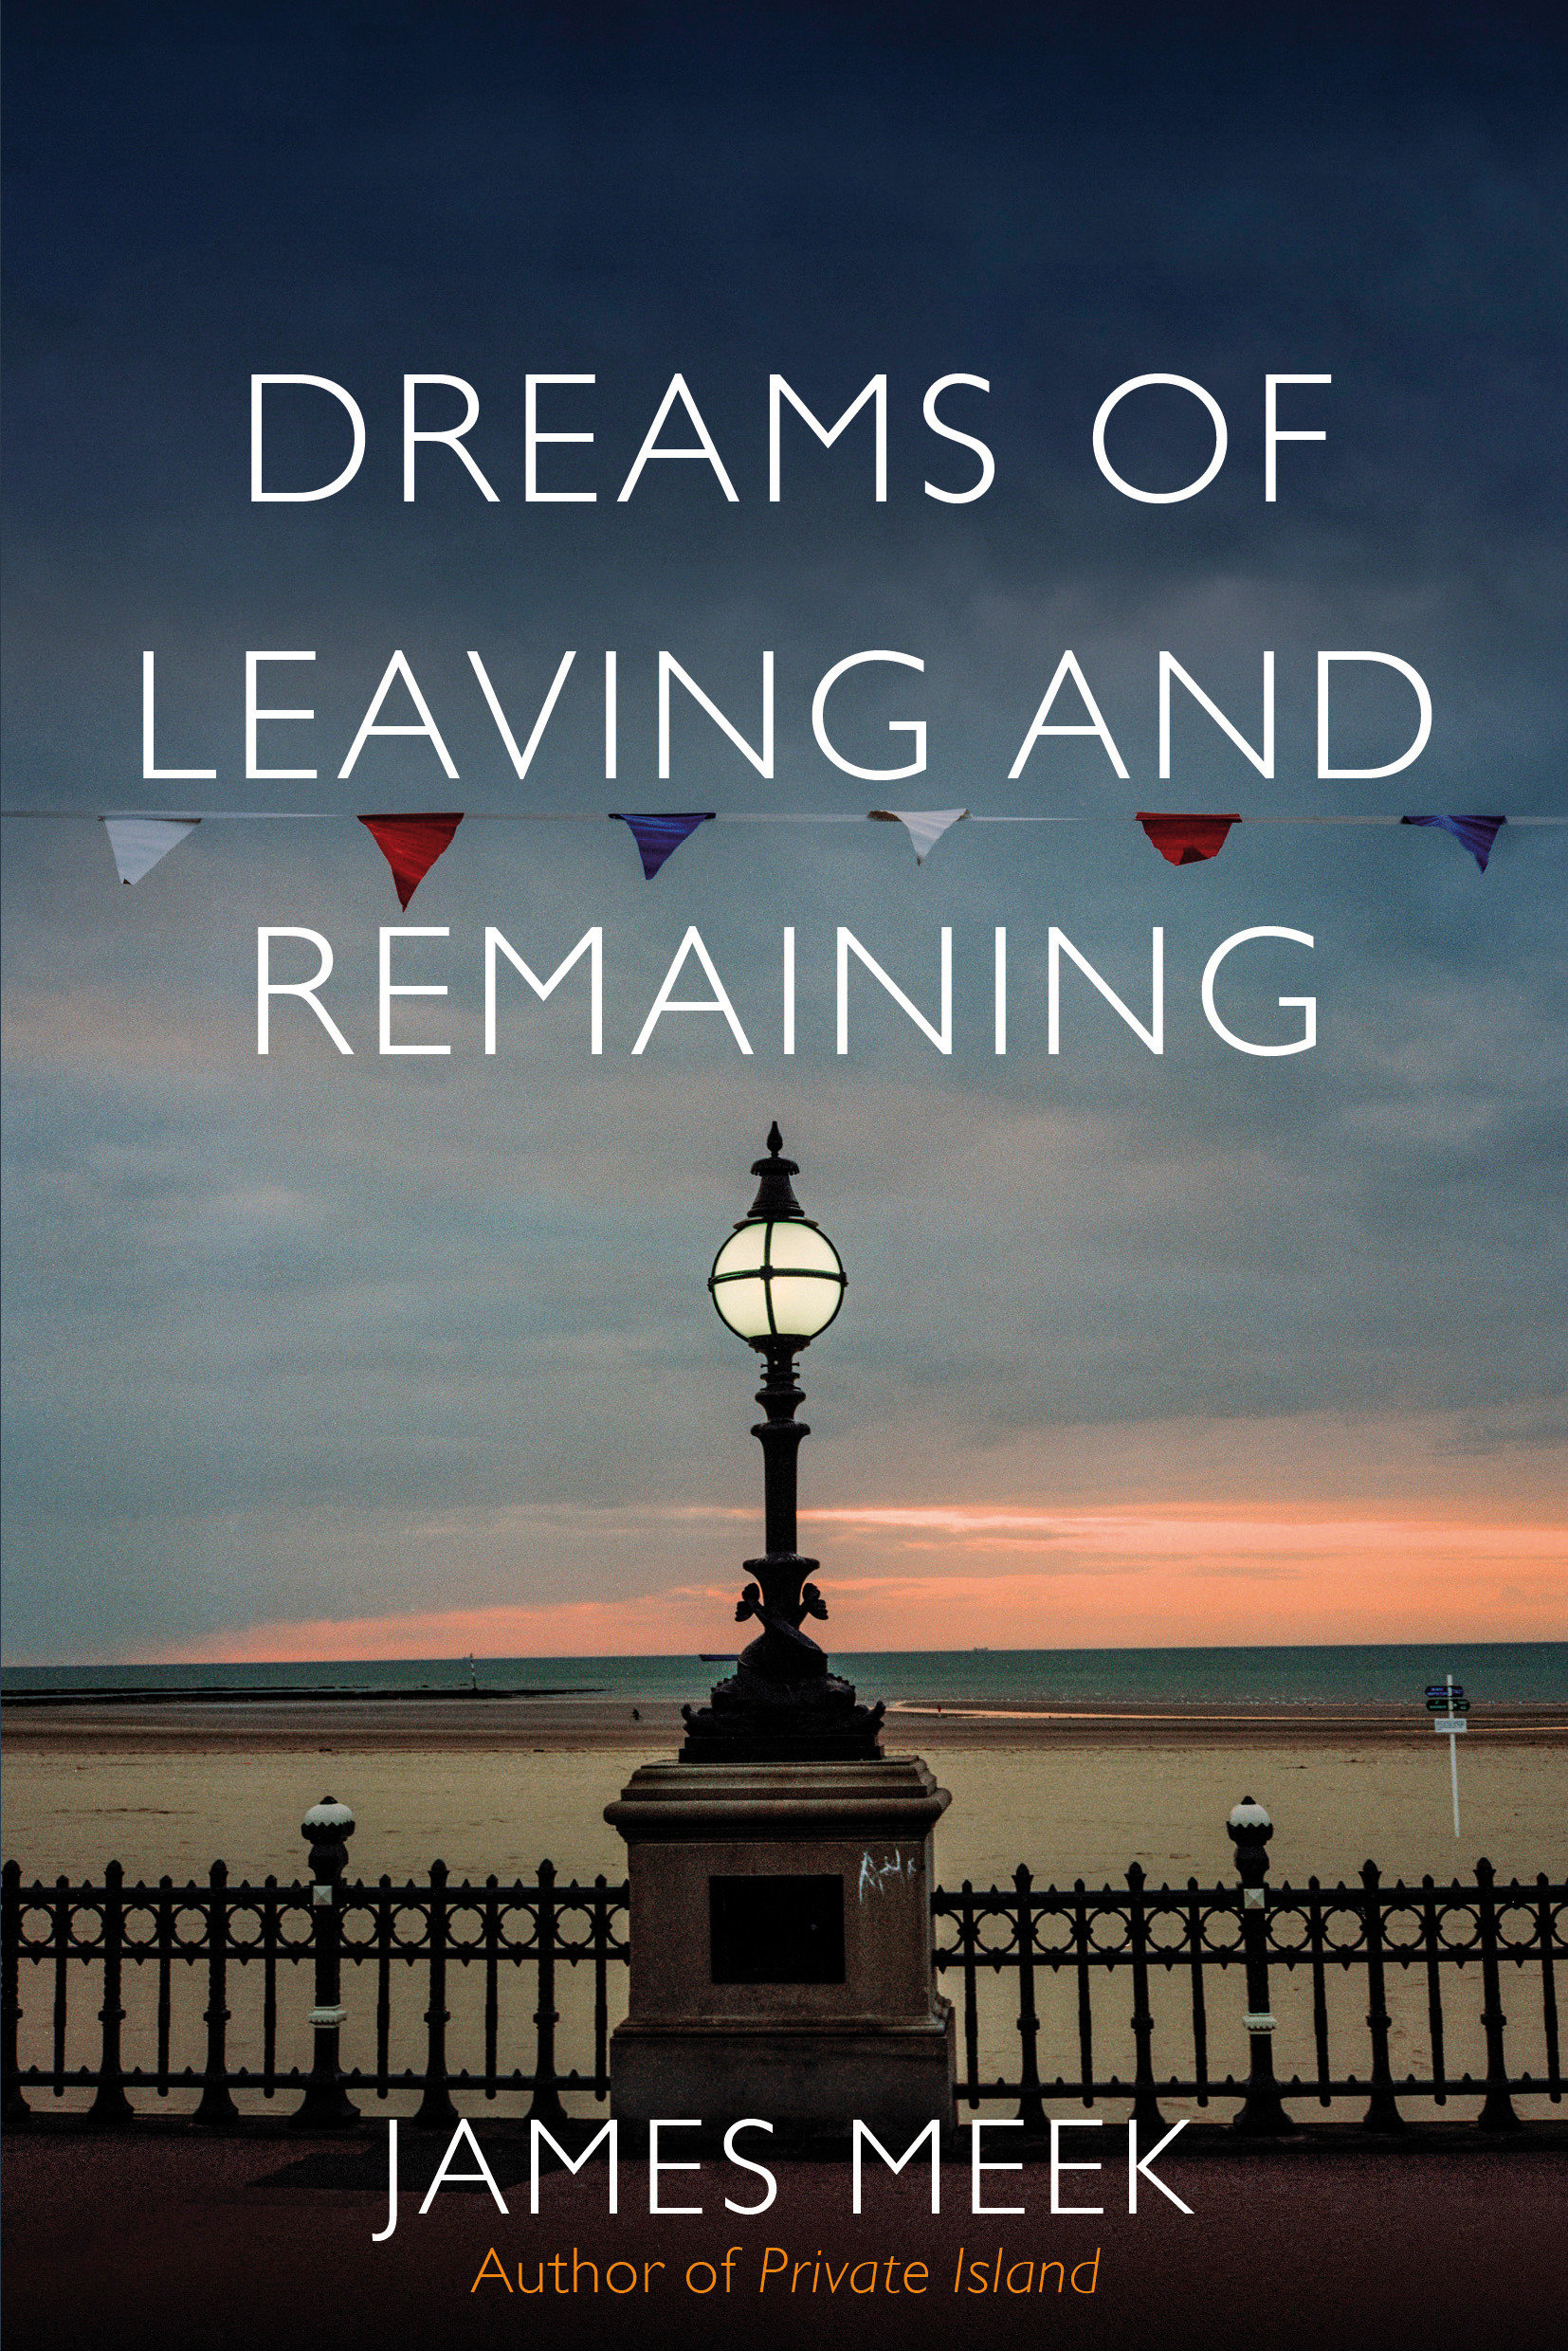 Dreams Of Leaving And Remaining (Hardcover Book)